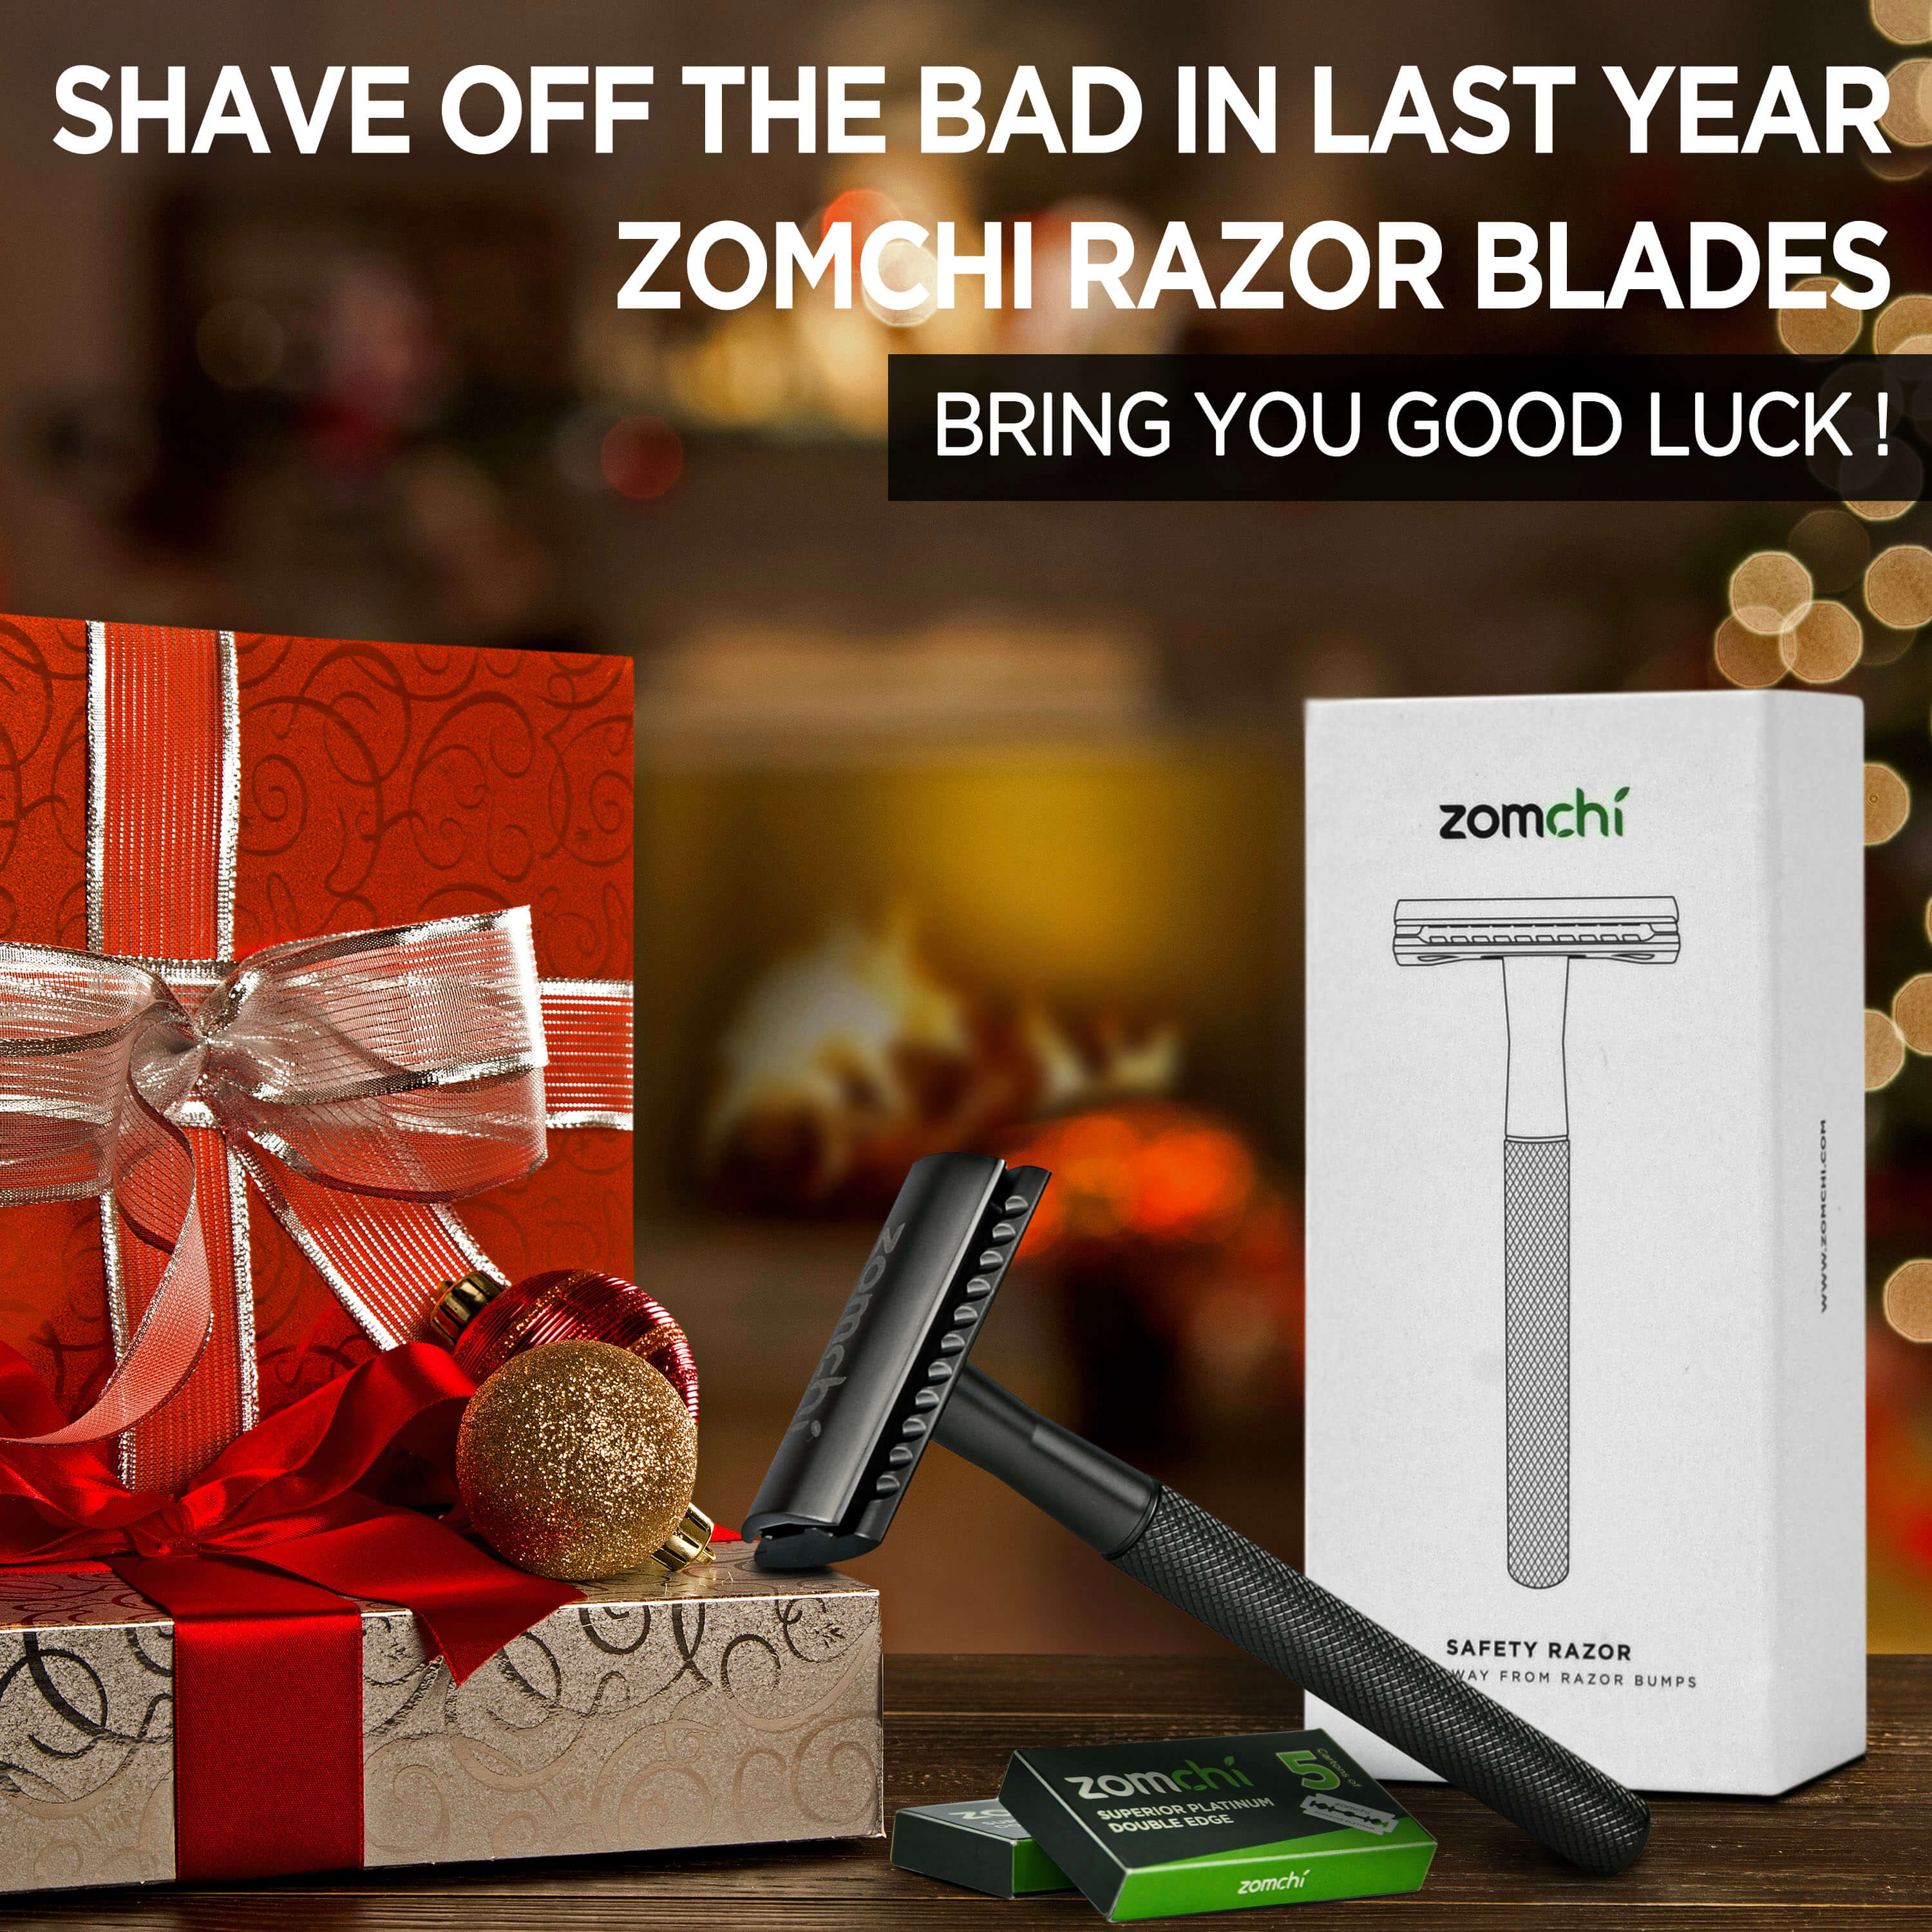 ZOMCHI Black Safety Razor As A Gift For Holiiday